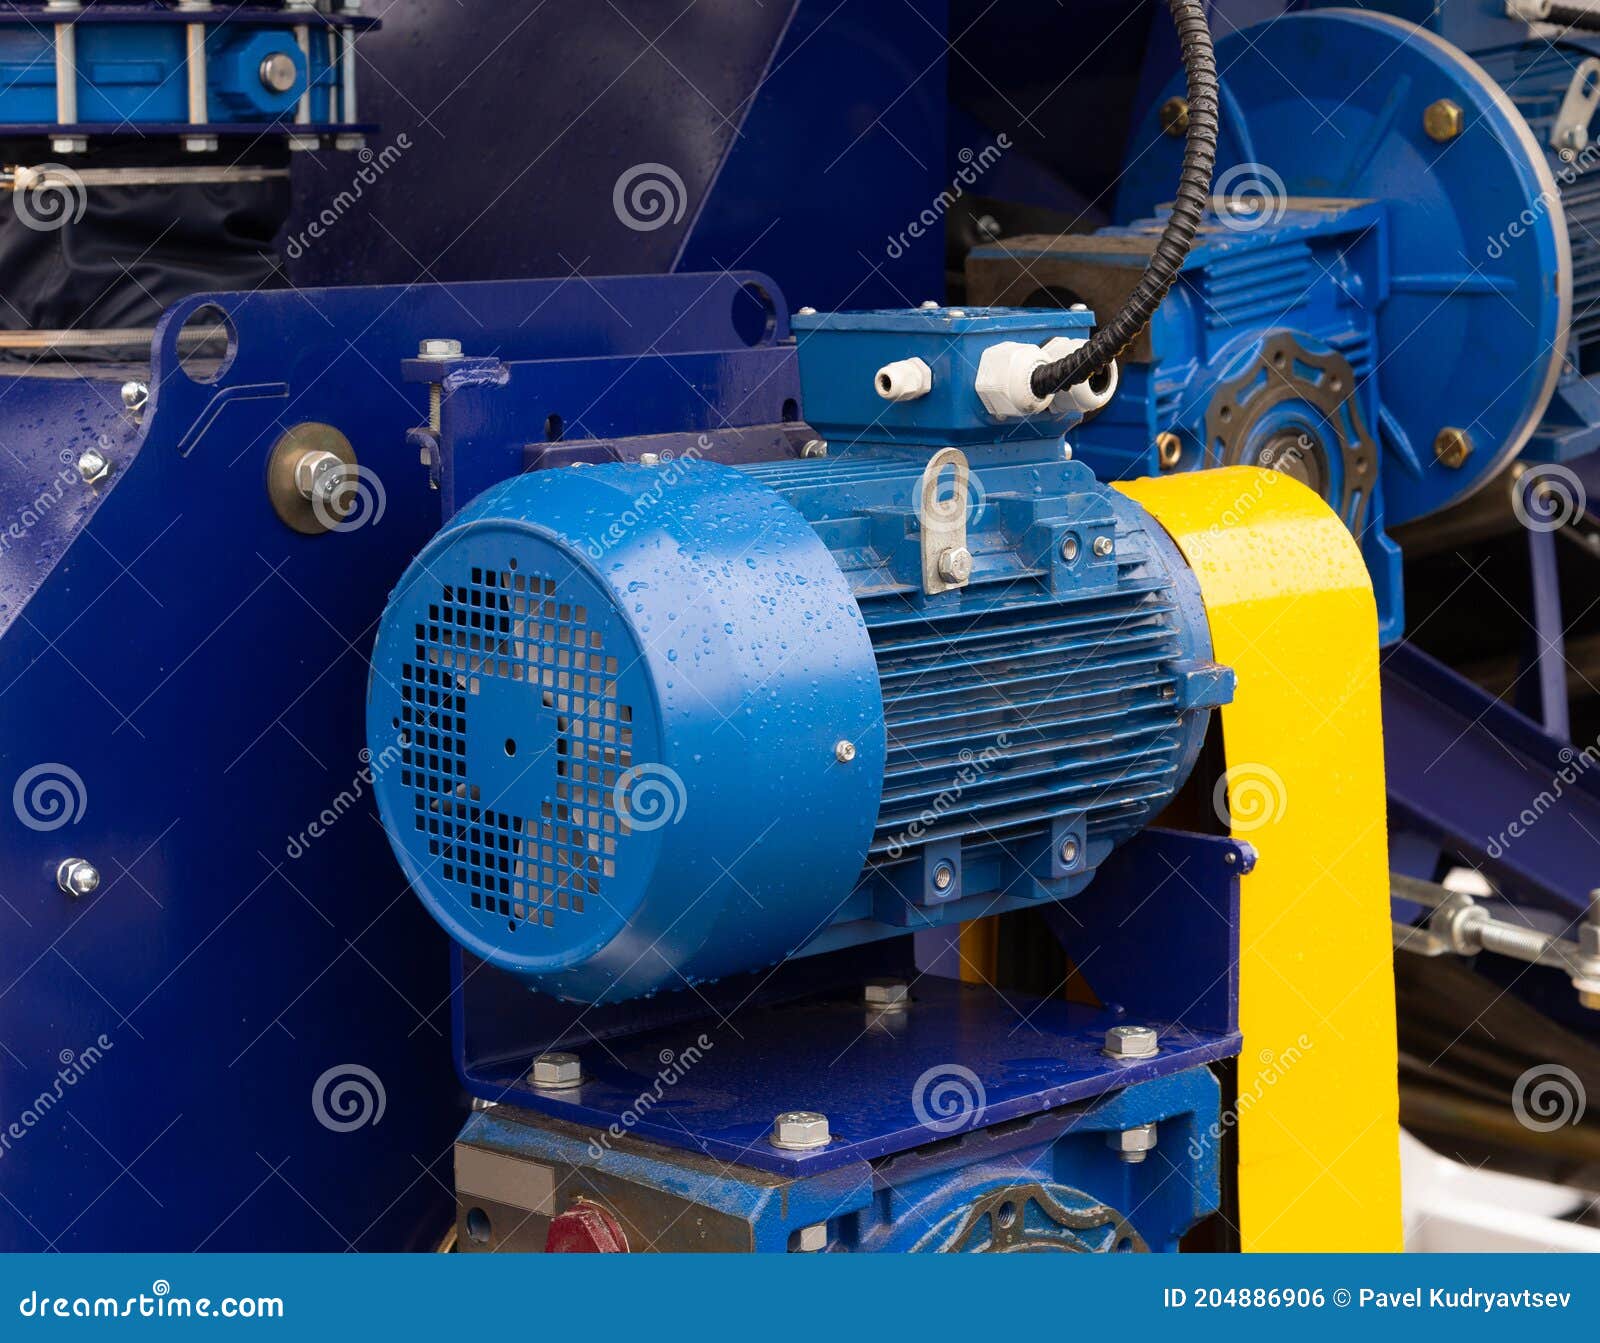 Powerful Electric Motor for Modern Stator Generator of Big Electric Motor in Coal Fired Power Plant Stock Photo Image of mechanism, generator: 204886906